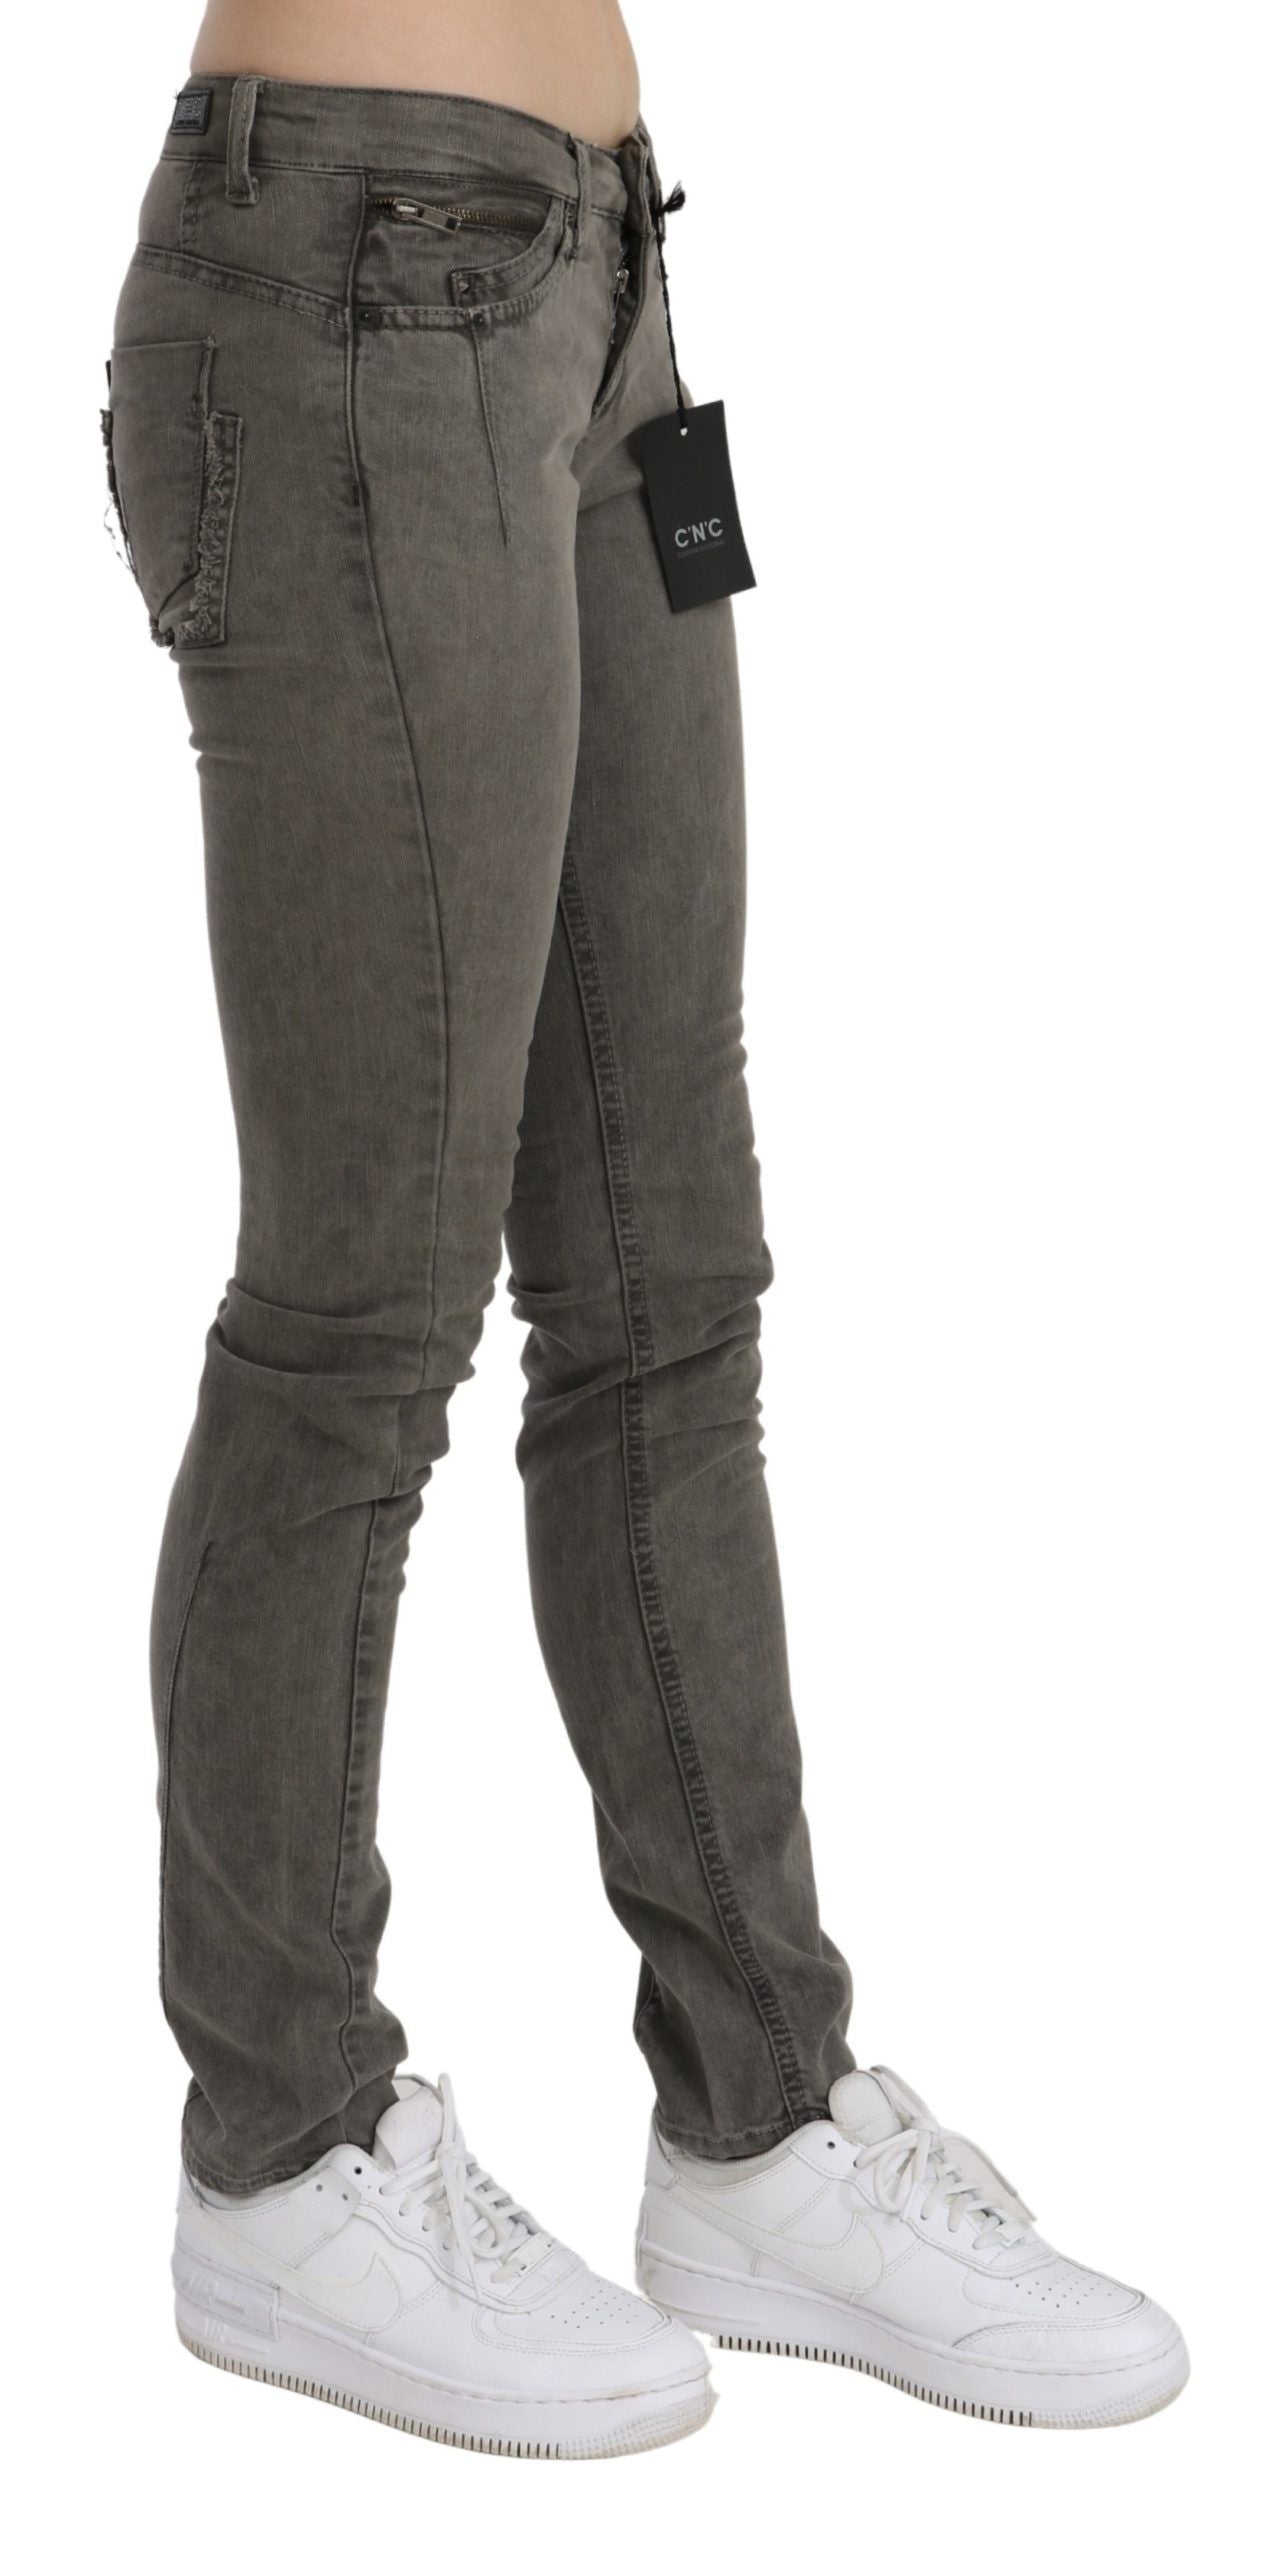 Chic Gray Slim Fit Cotton Jeans